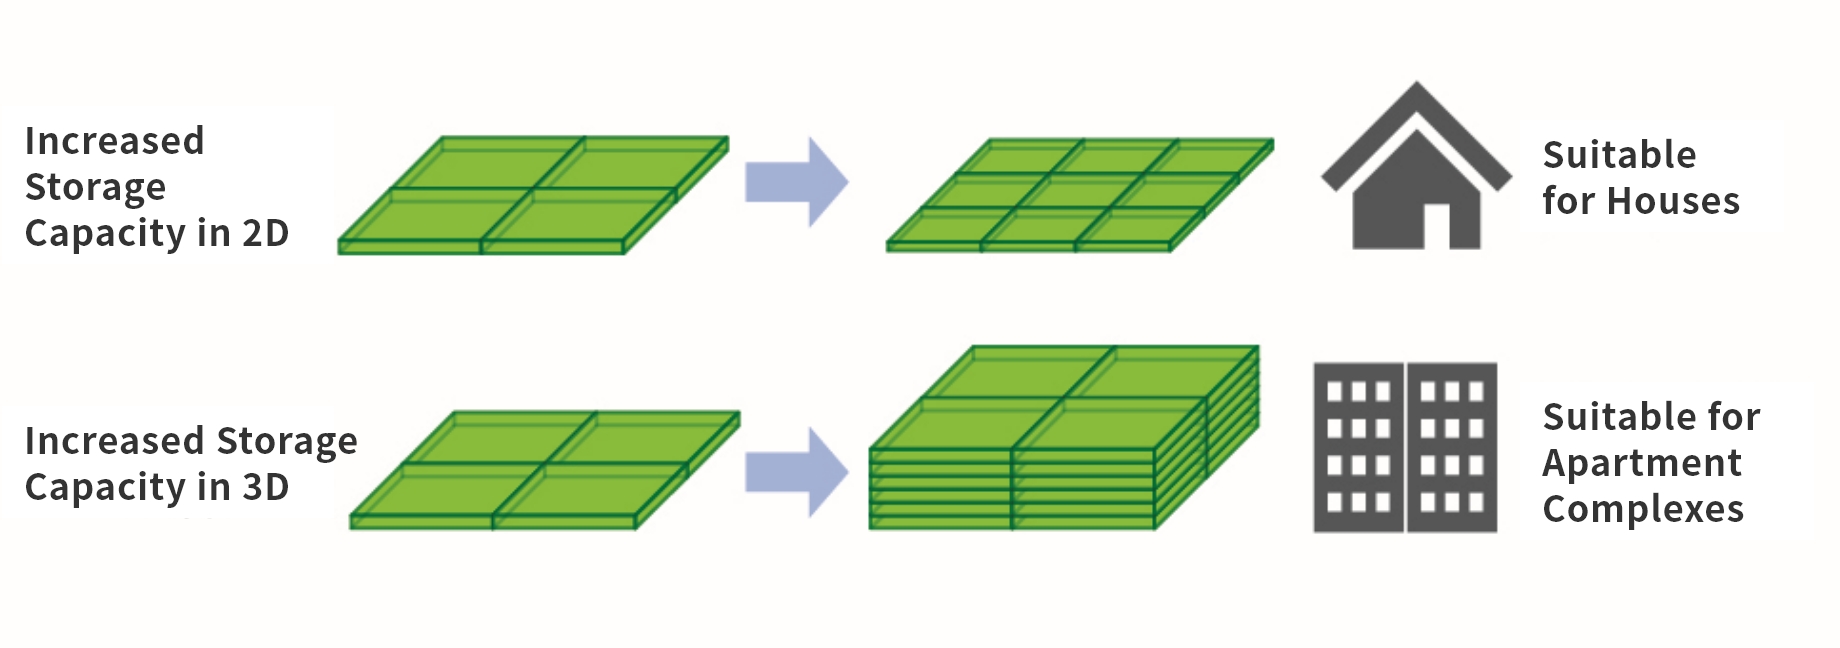 Fig. 2 - Increasing Storage Capacity in 2D and 3D